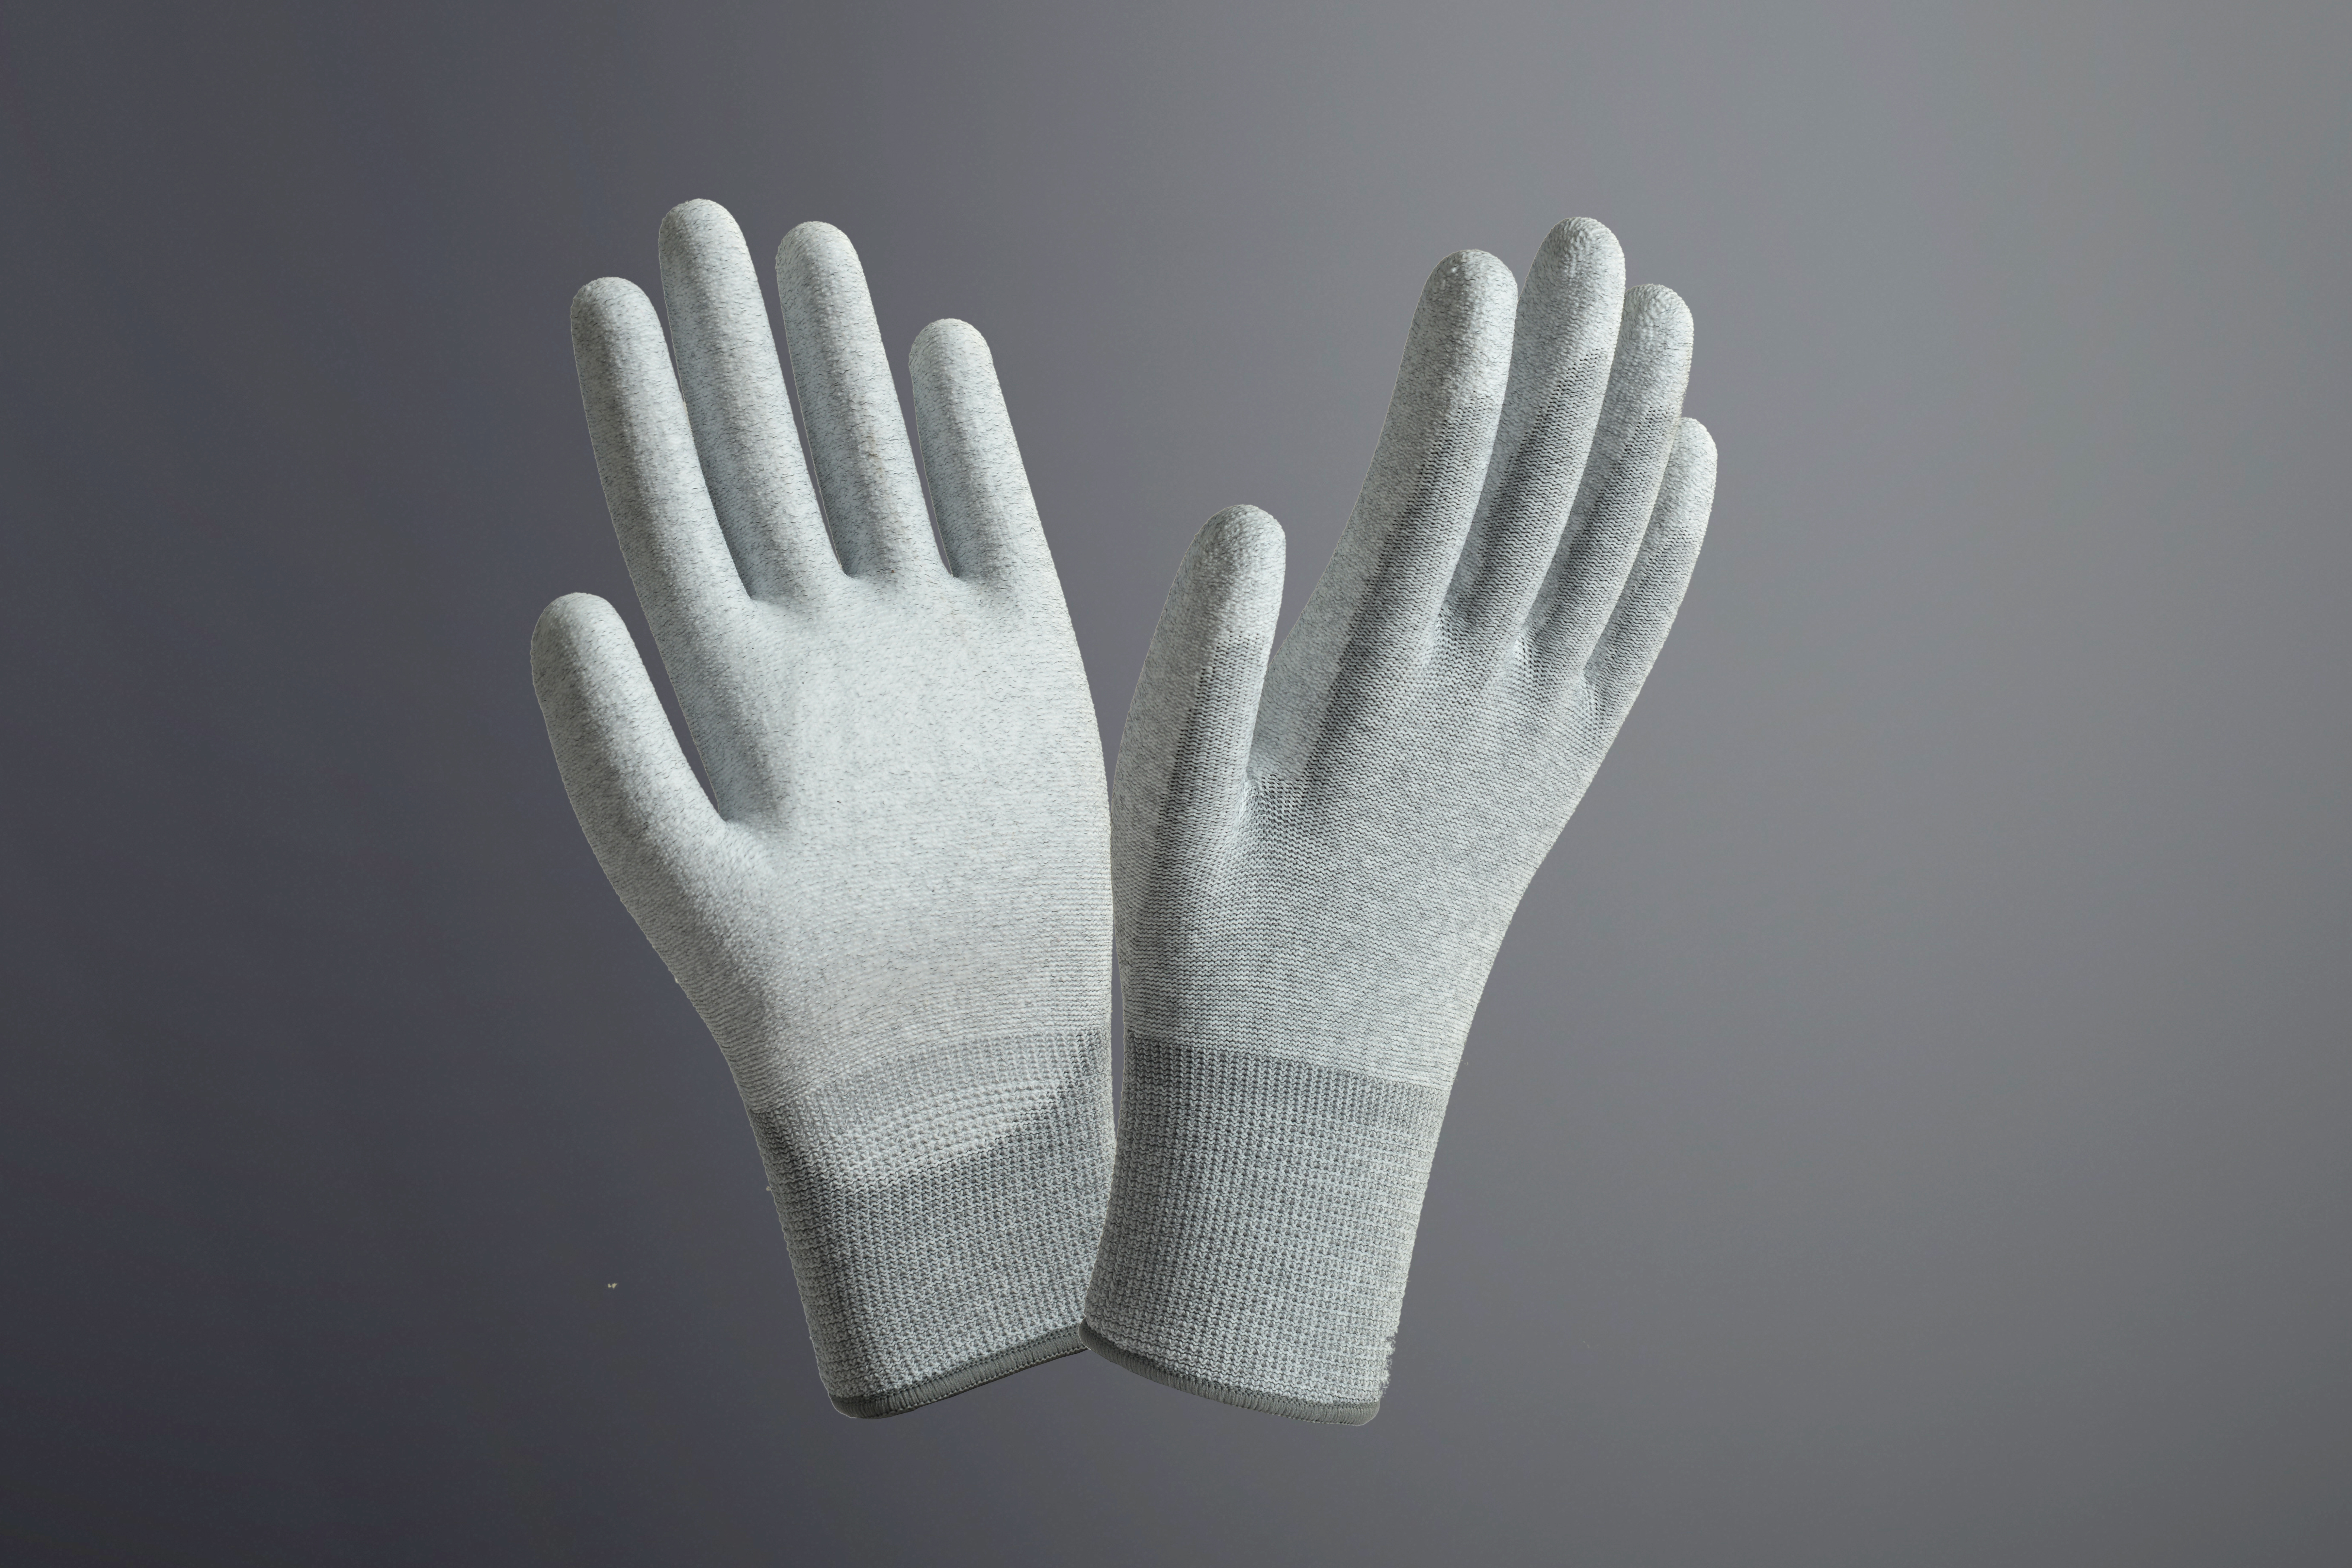 Which Materials Are Better For Labor Protection Gloves? How To Correctly Select And Use Gloves